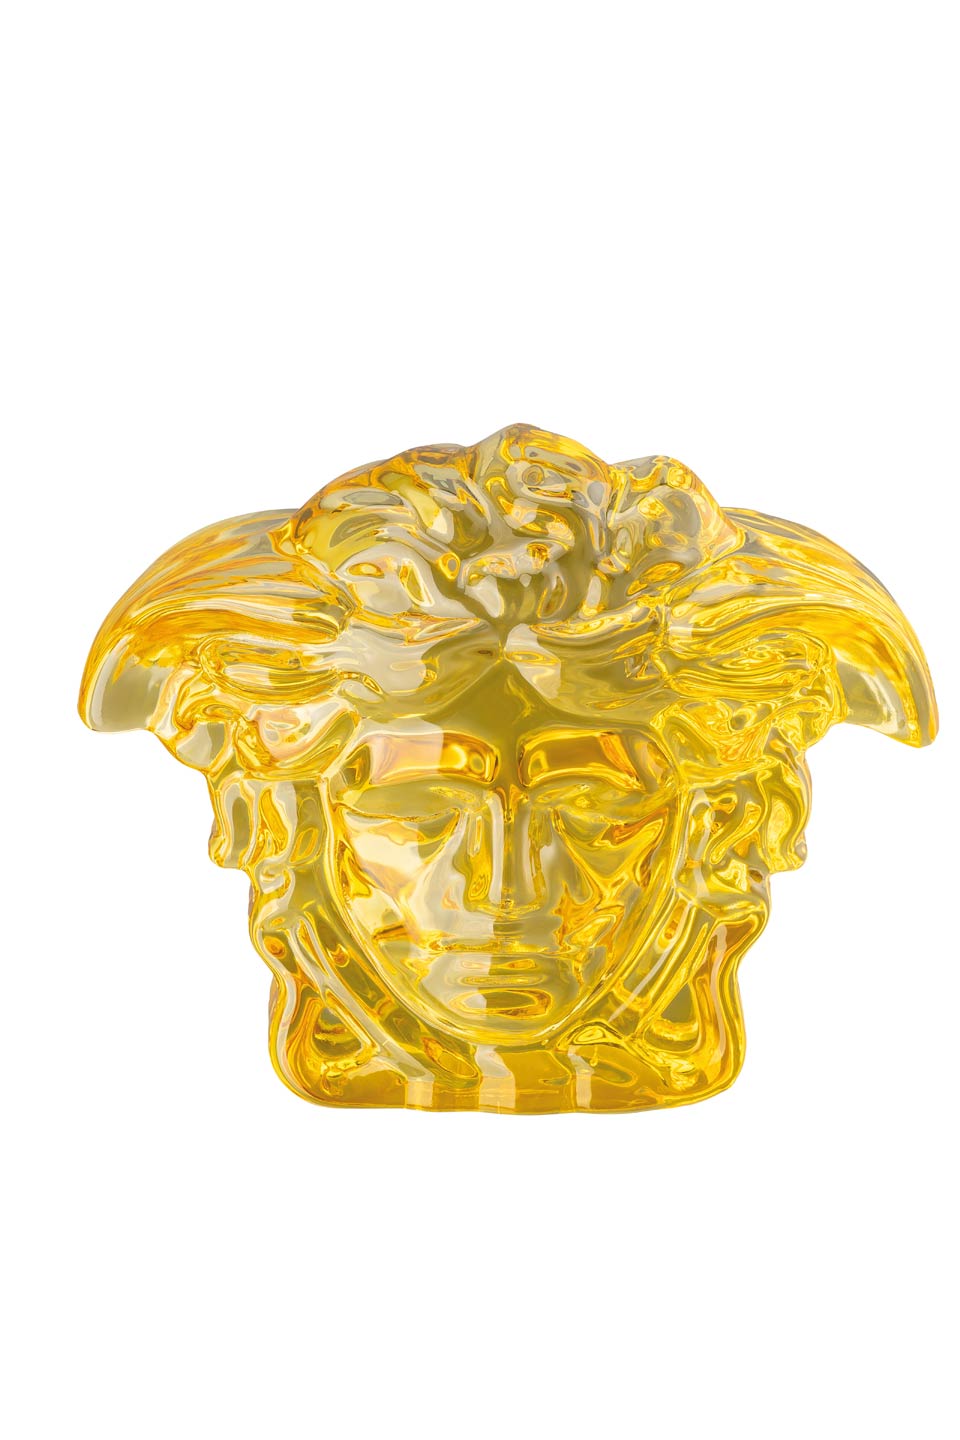 Versace by Rosenthal Medusa Lumiere Amber Paperweight 5 x 3 in H- 4 in ...